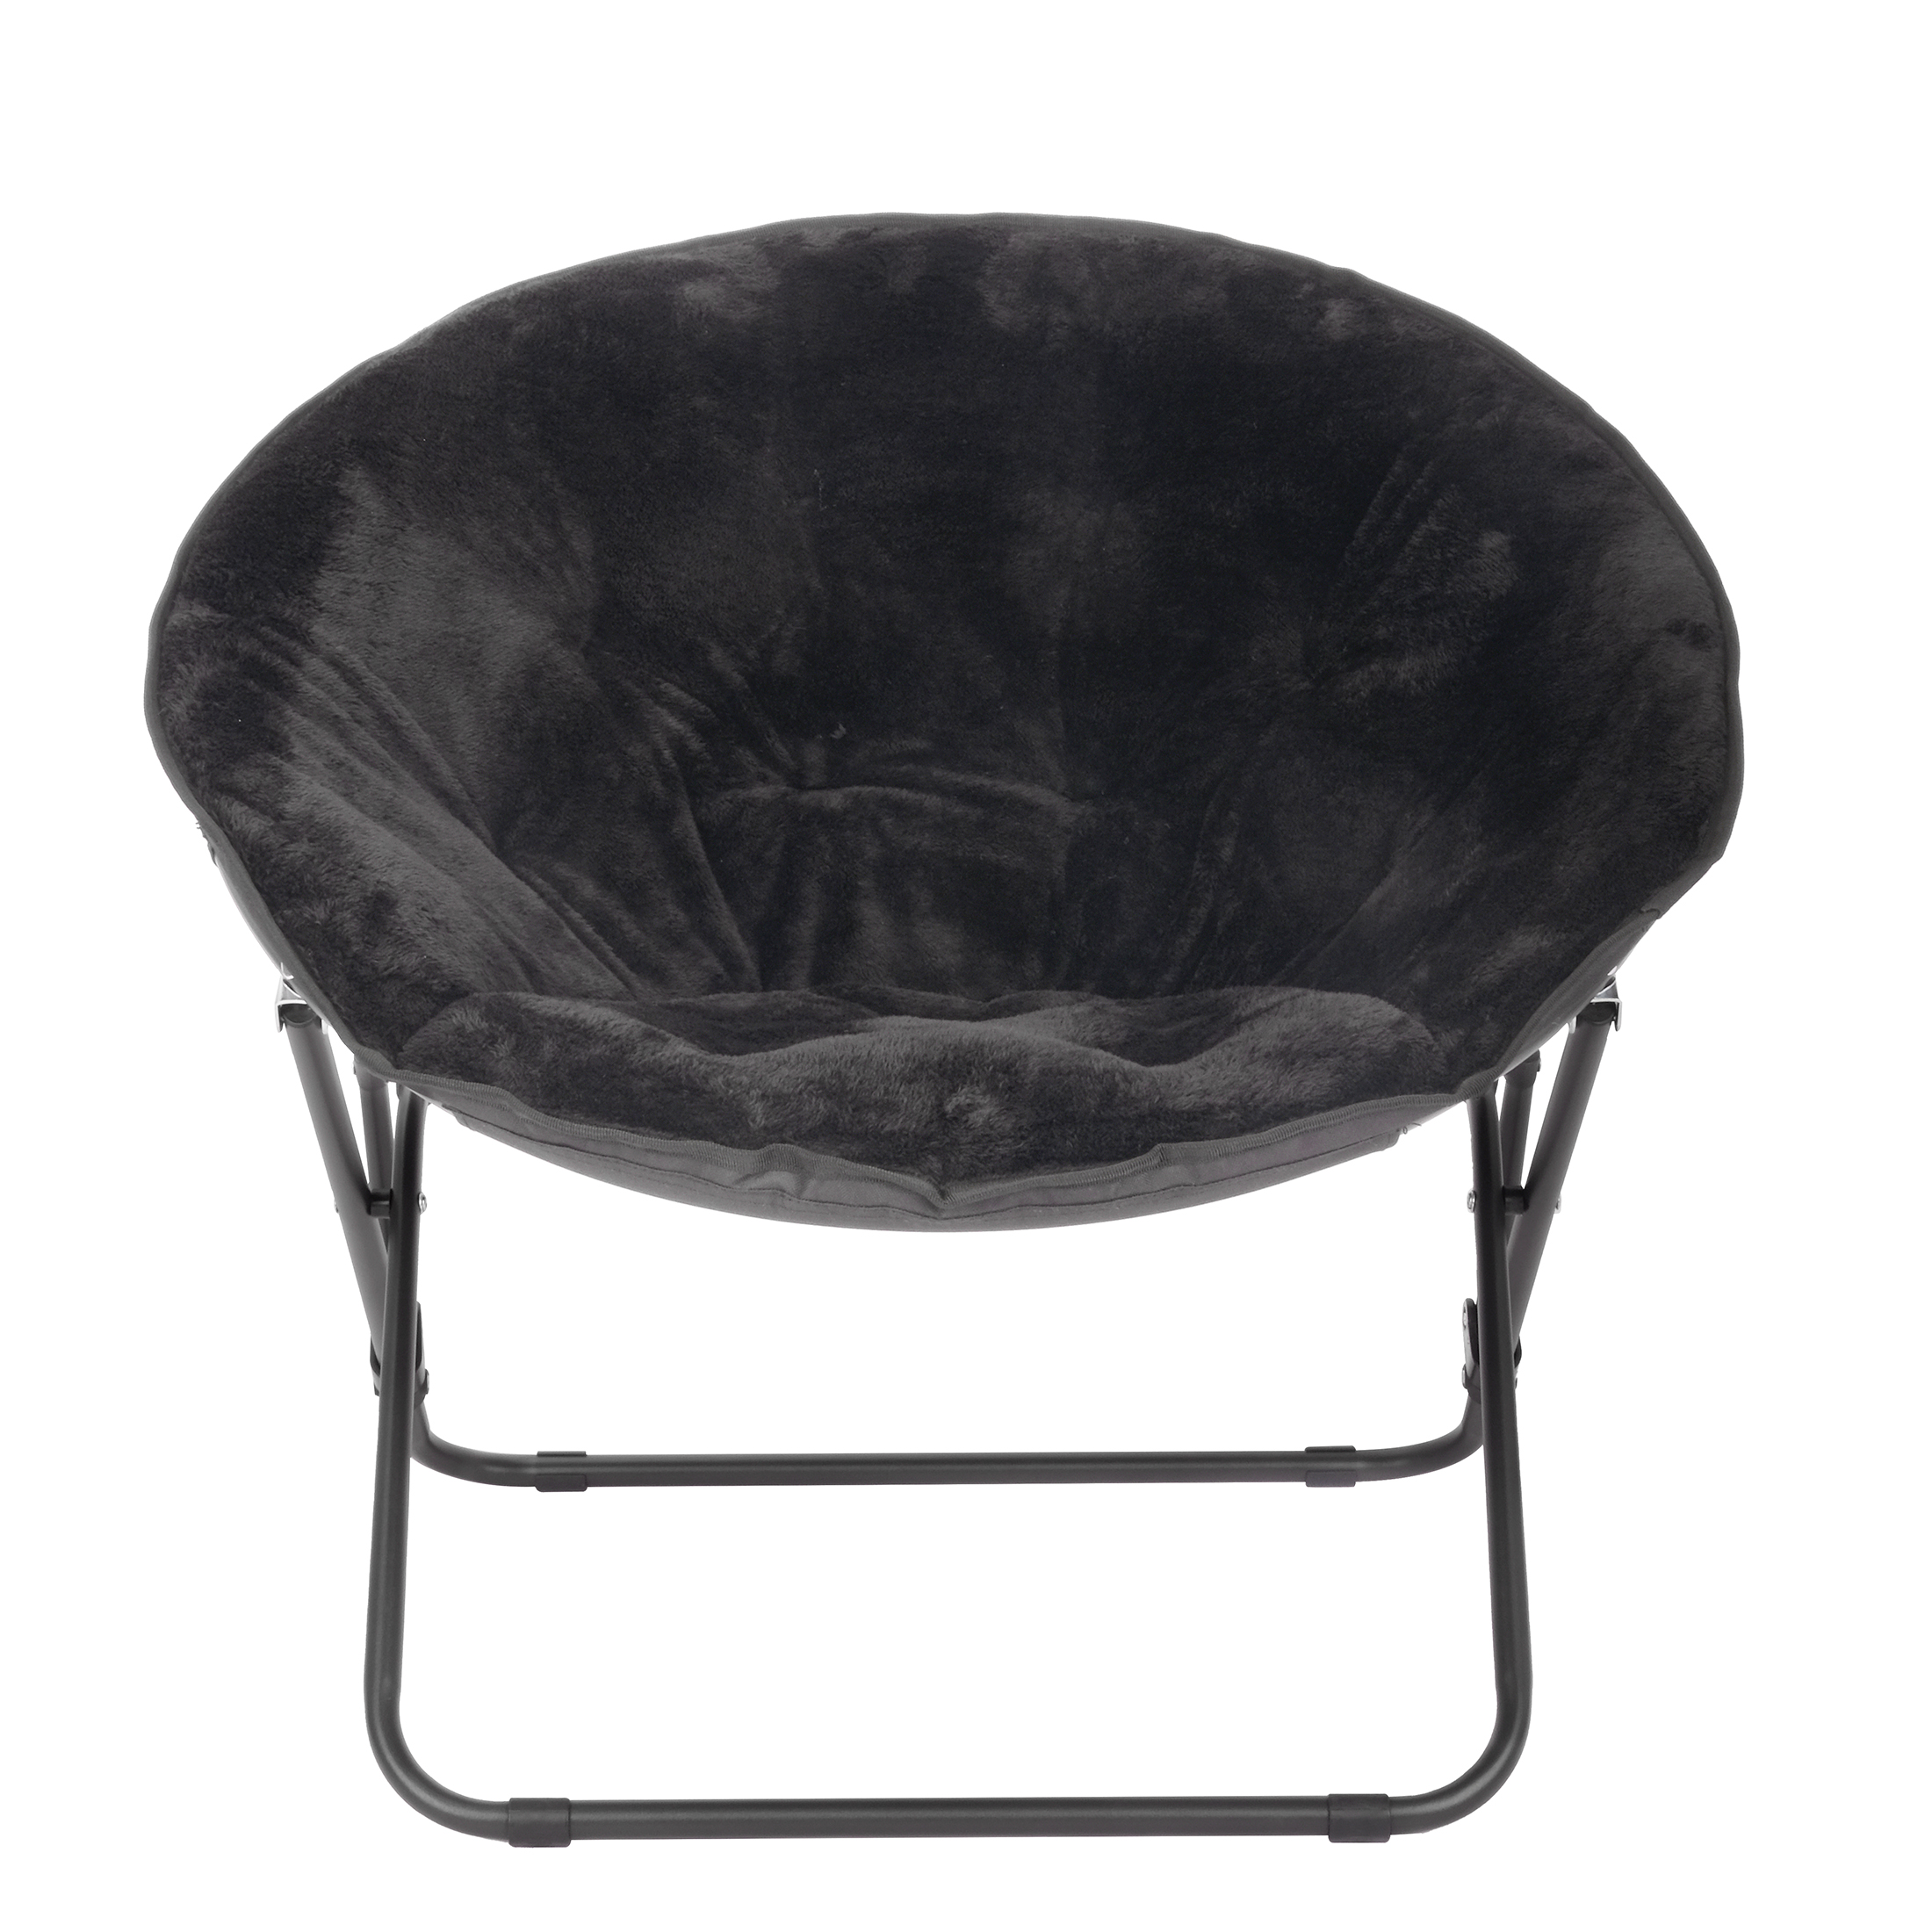 Mainstays Saucer Chair for Kids and Teens, Black - image 1 of 6